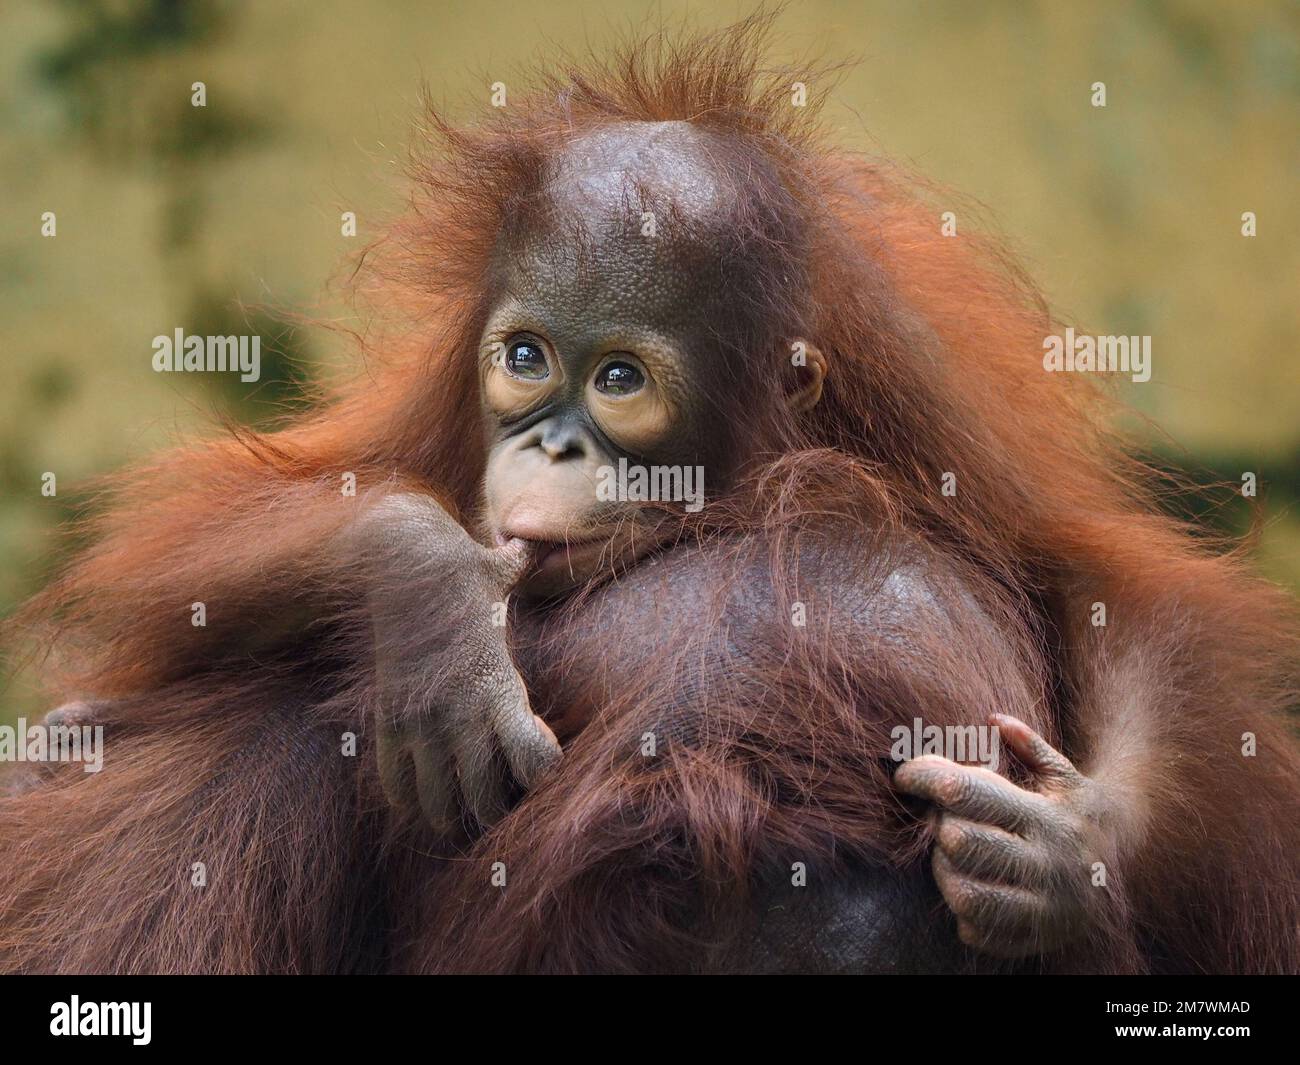 THIS BABY ORANGUTAN was captured looking like it was suffering from January Blues as it sat on his mother’s head    One of the images from Jakarta, In Stock Photo